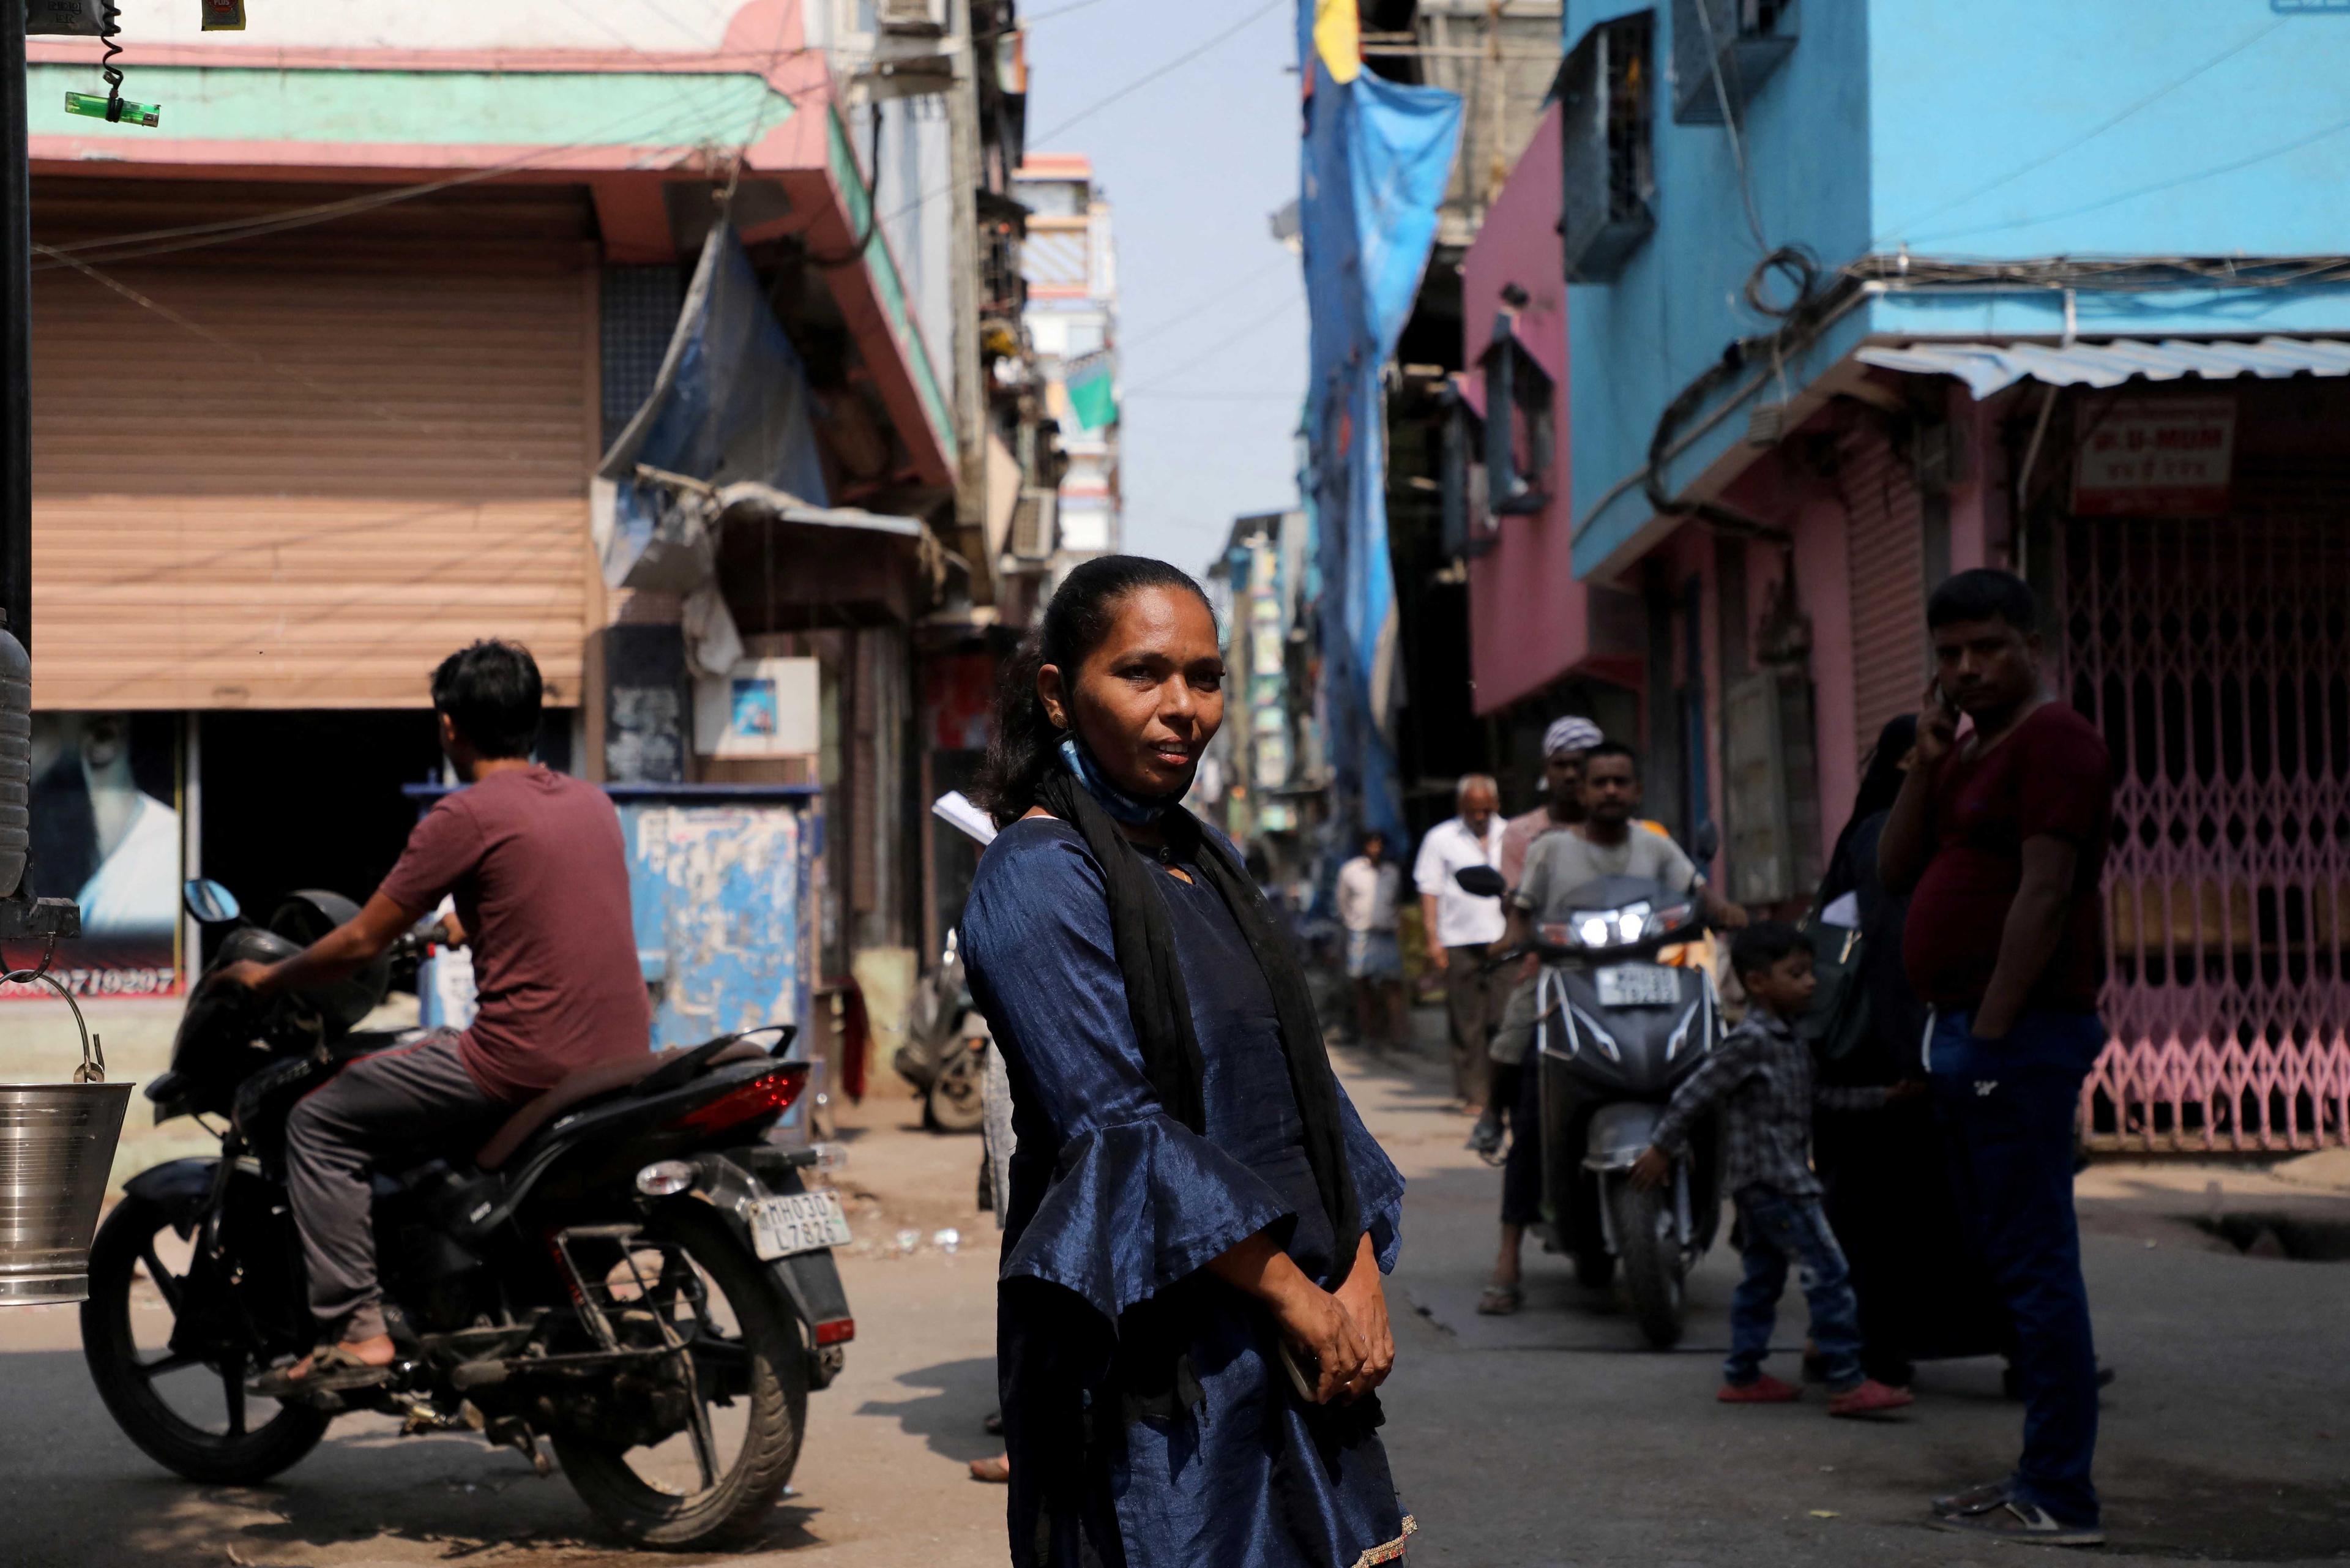 A woman poses for a photograph at a slum area in Mumbai, India, April 20. Photo: Reuters